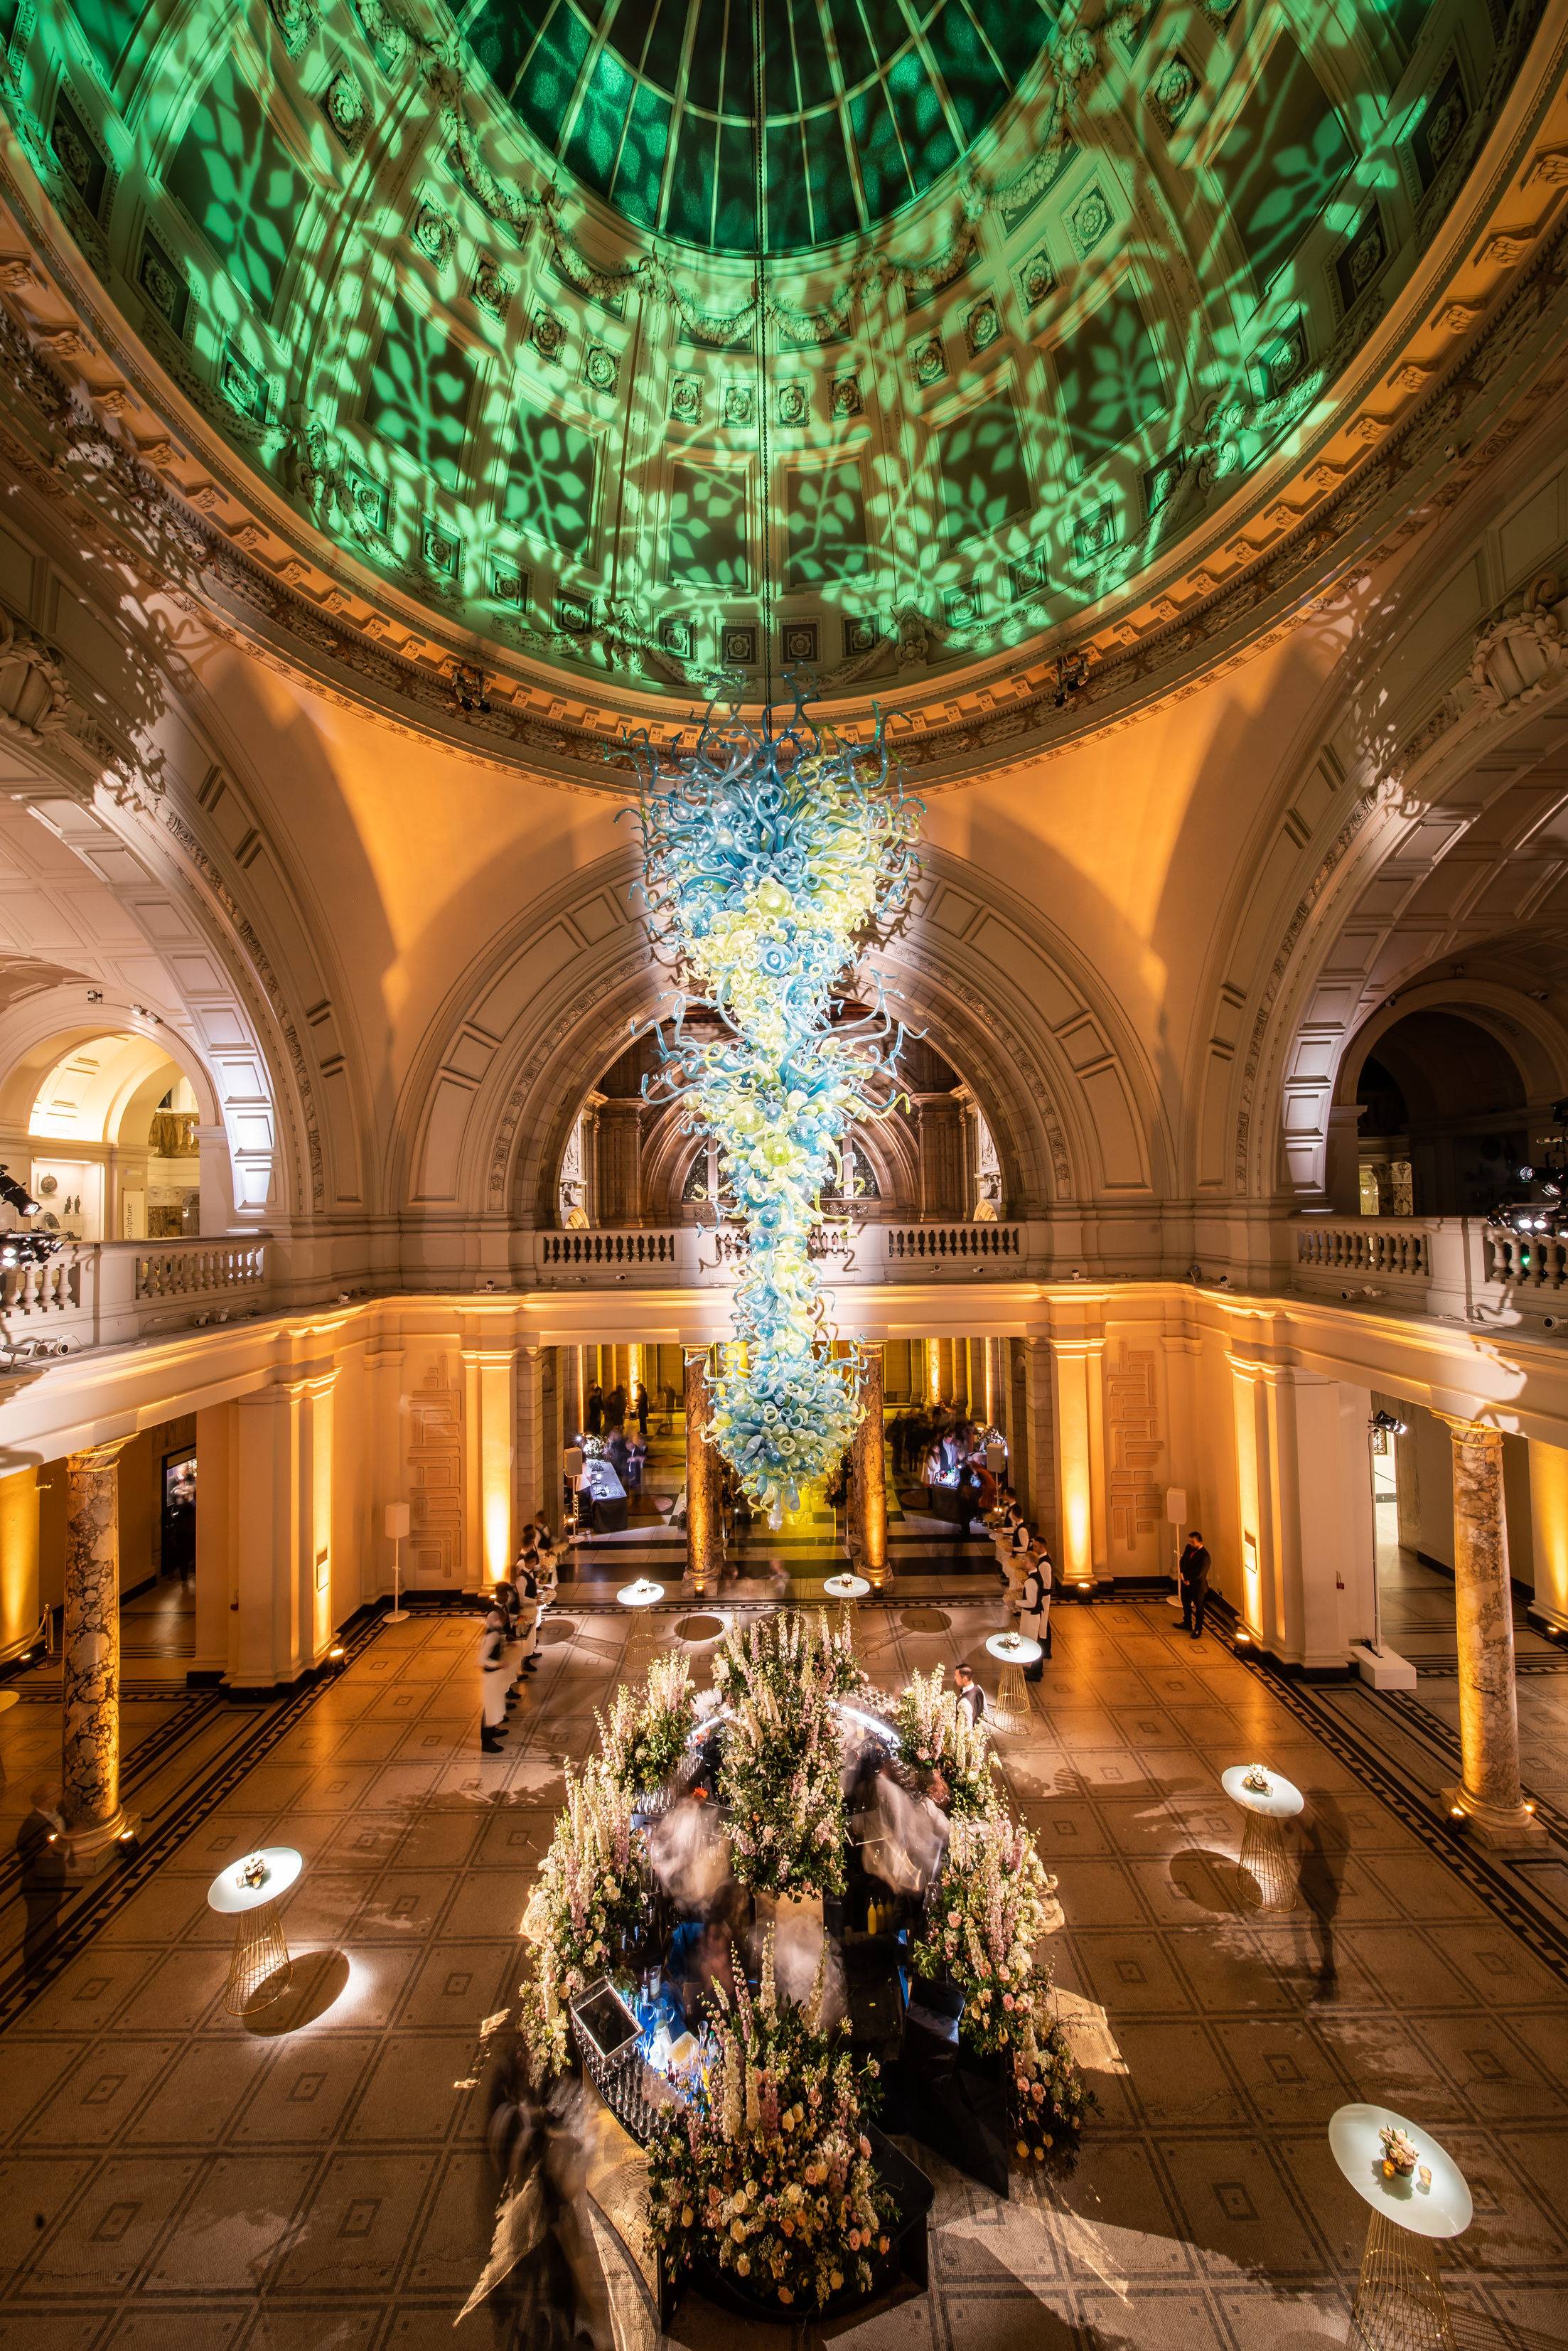 Pattern wash ceiling projection, Luxury events at the Victoria and Albert Museum London, Unique wedding venue London, luxury event planners at the Victoria and Albert Museum London, Luxury wedding planners, London venue for hire, The Dome at the V&A 